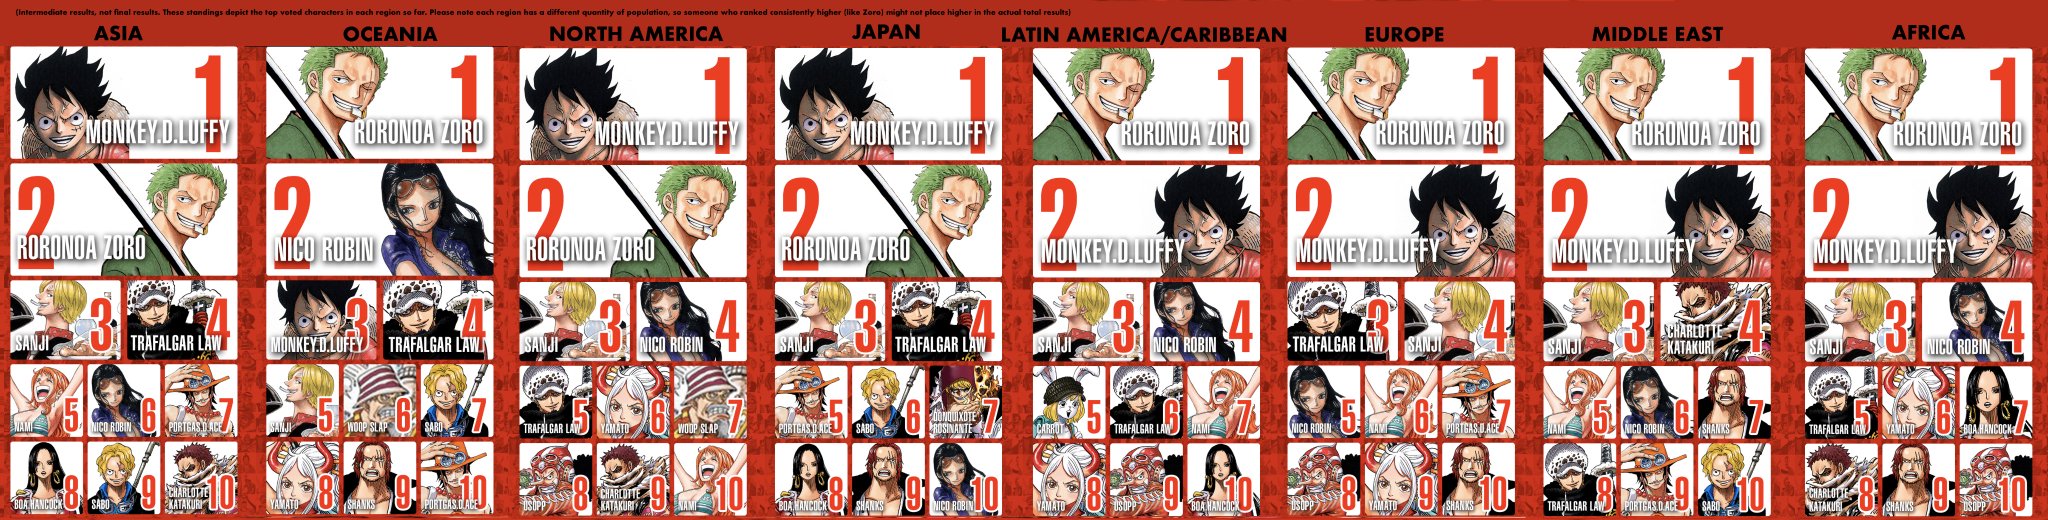 One Piece Reveals Midway Results Of Global Popularity Poll